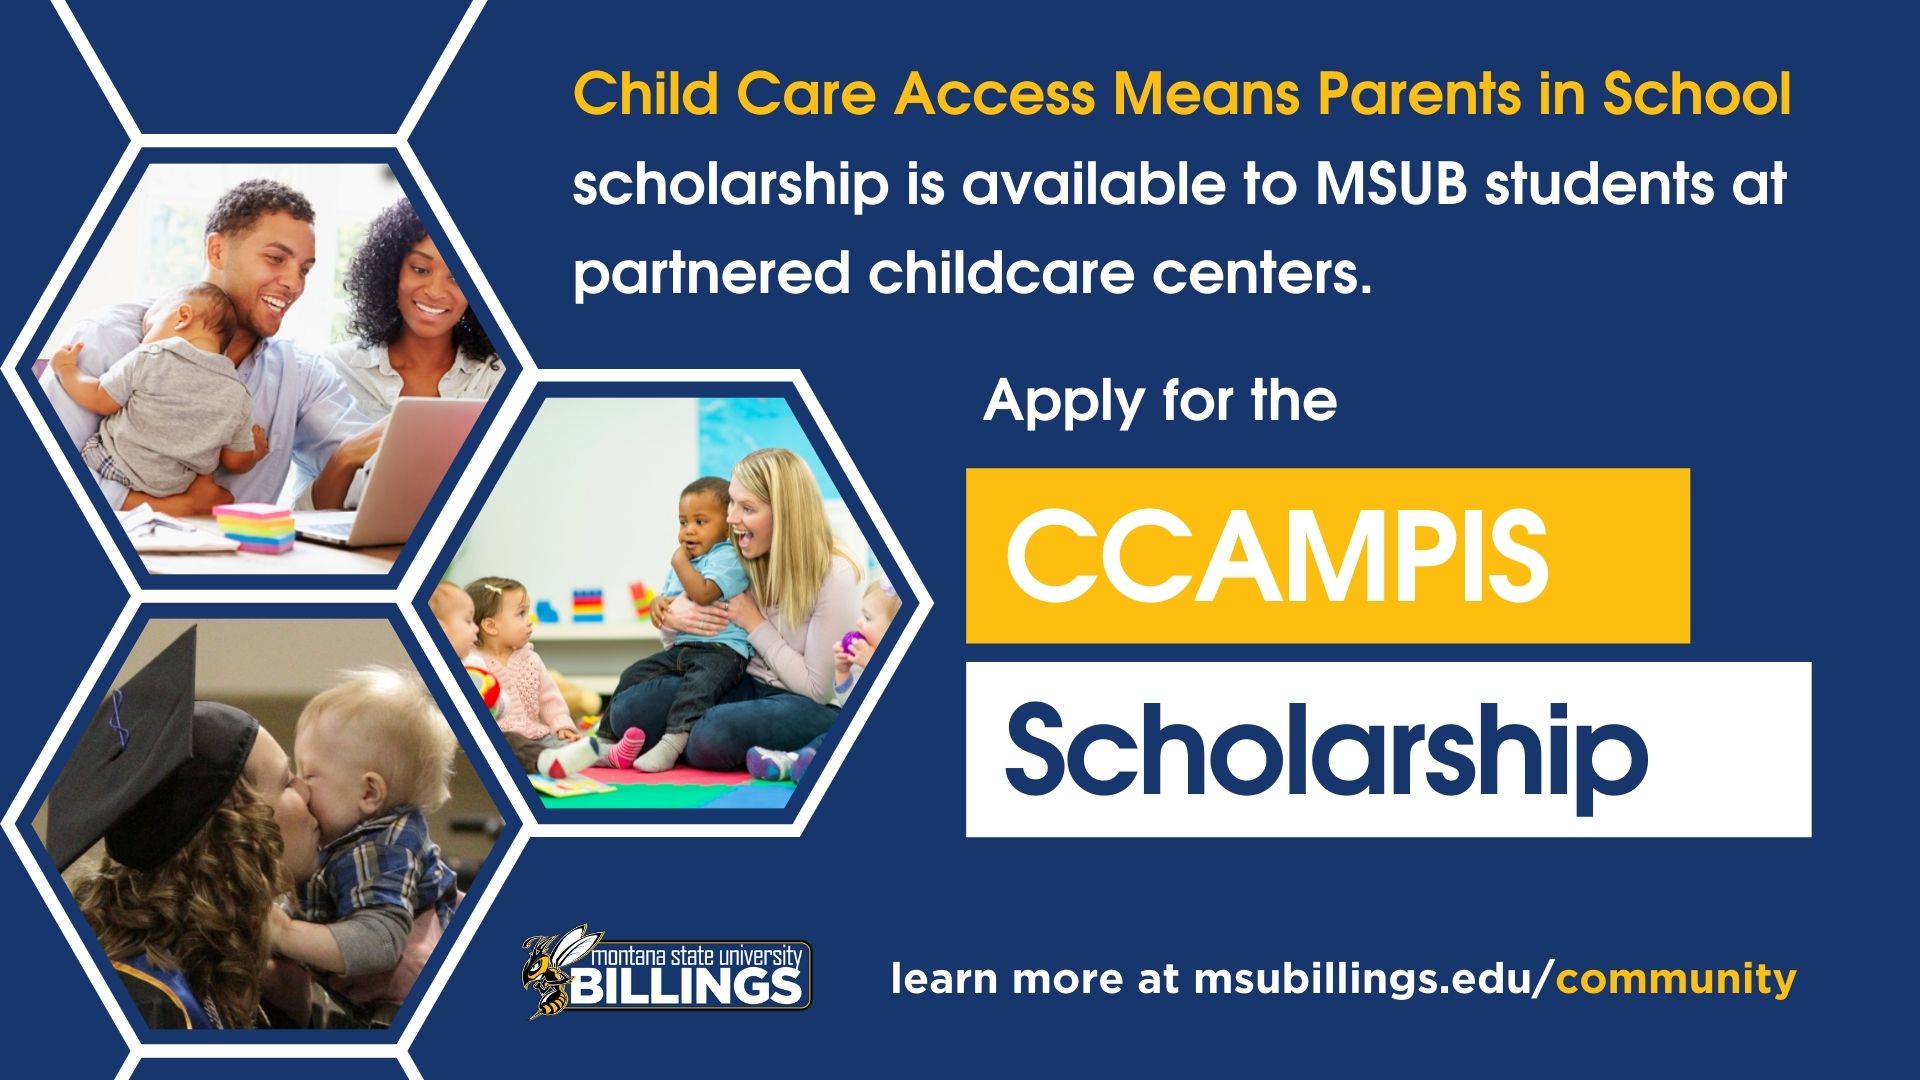 The Child Care Access Means Parents in School (CCAMPIS) scholarship is available to MSU Billings students at partnered childcare centers. Apply for the CCAMPIS scholarship.